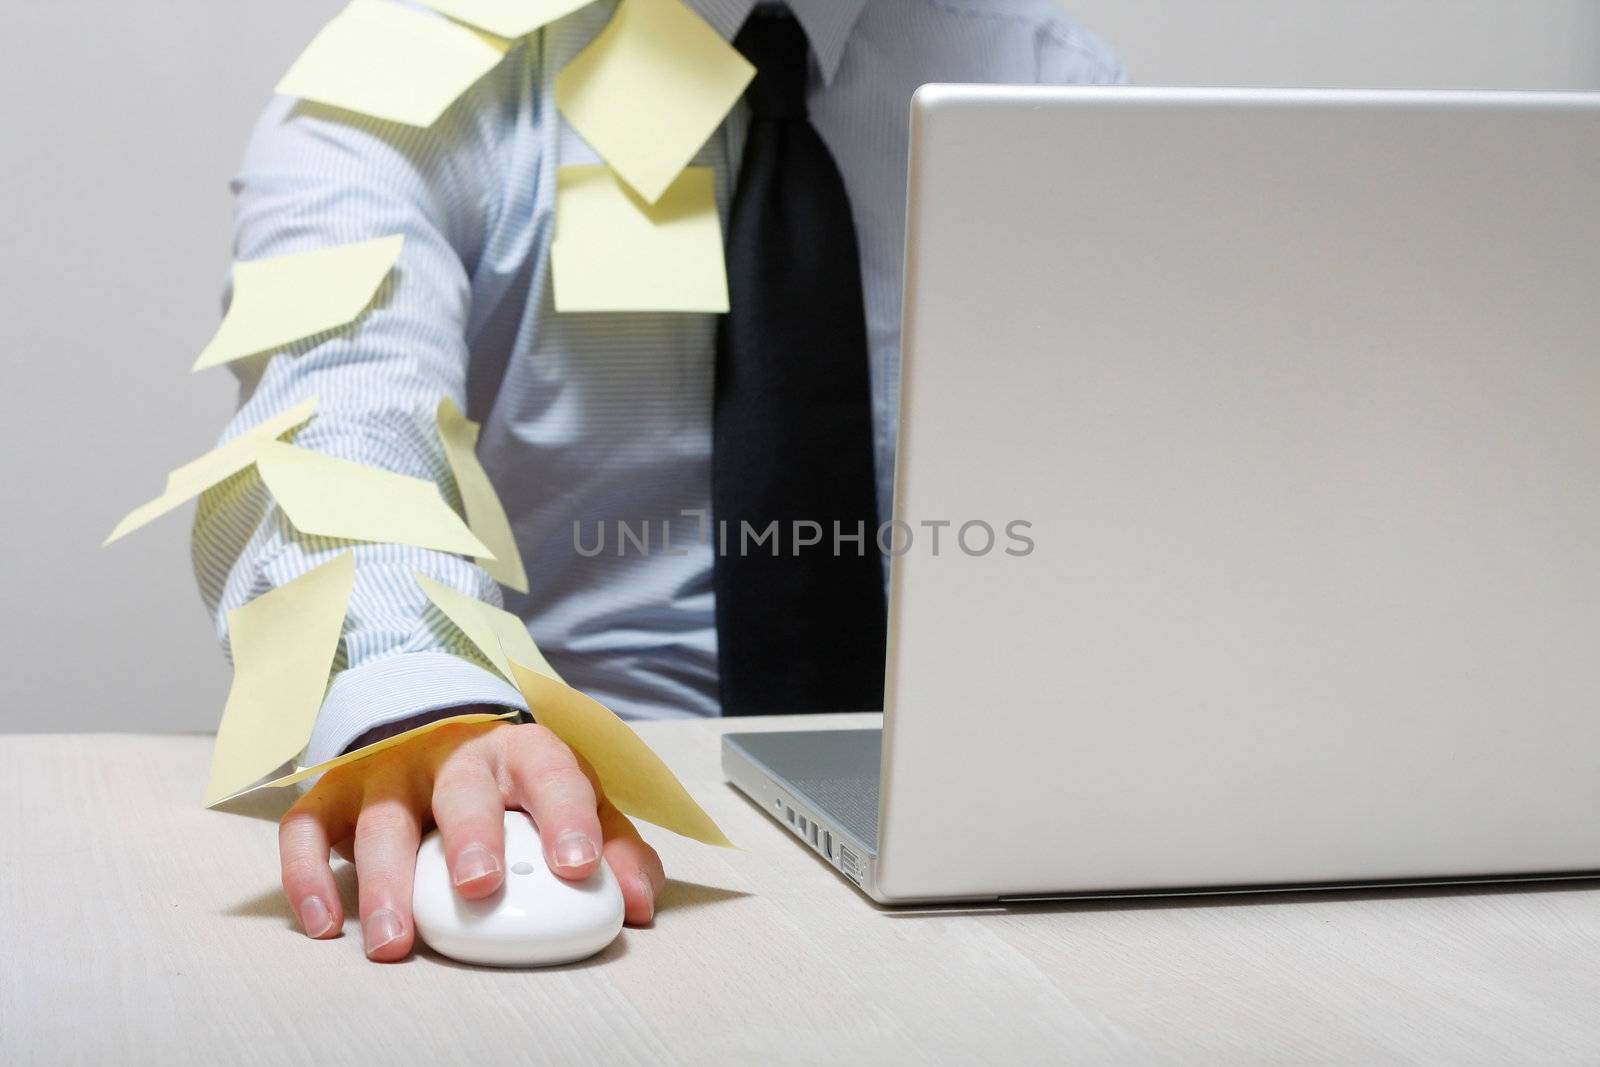 A man covered in yellow notes by a laptop